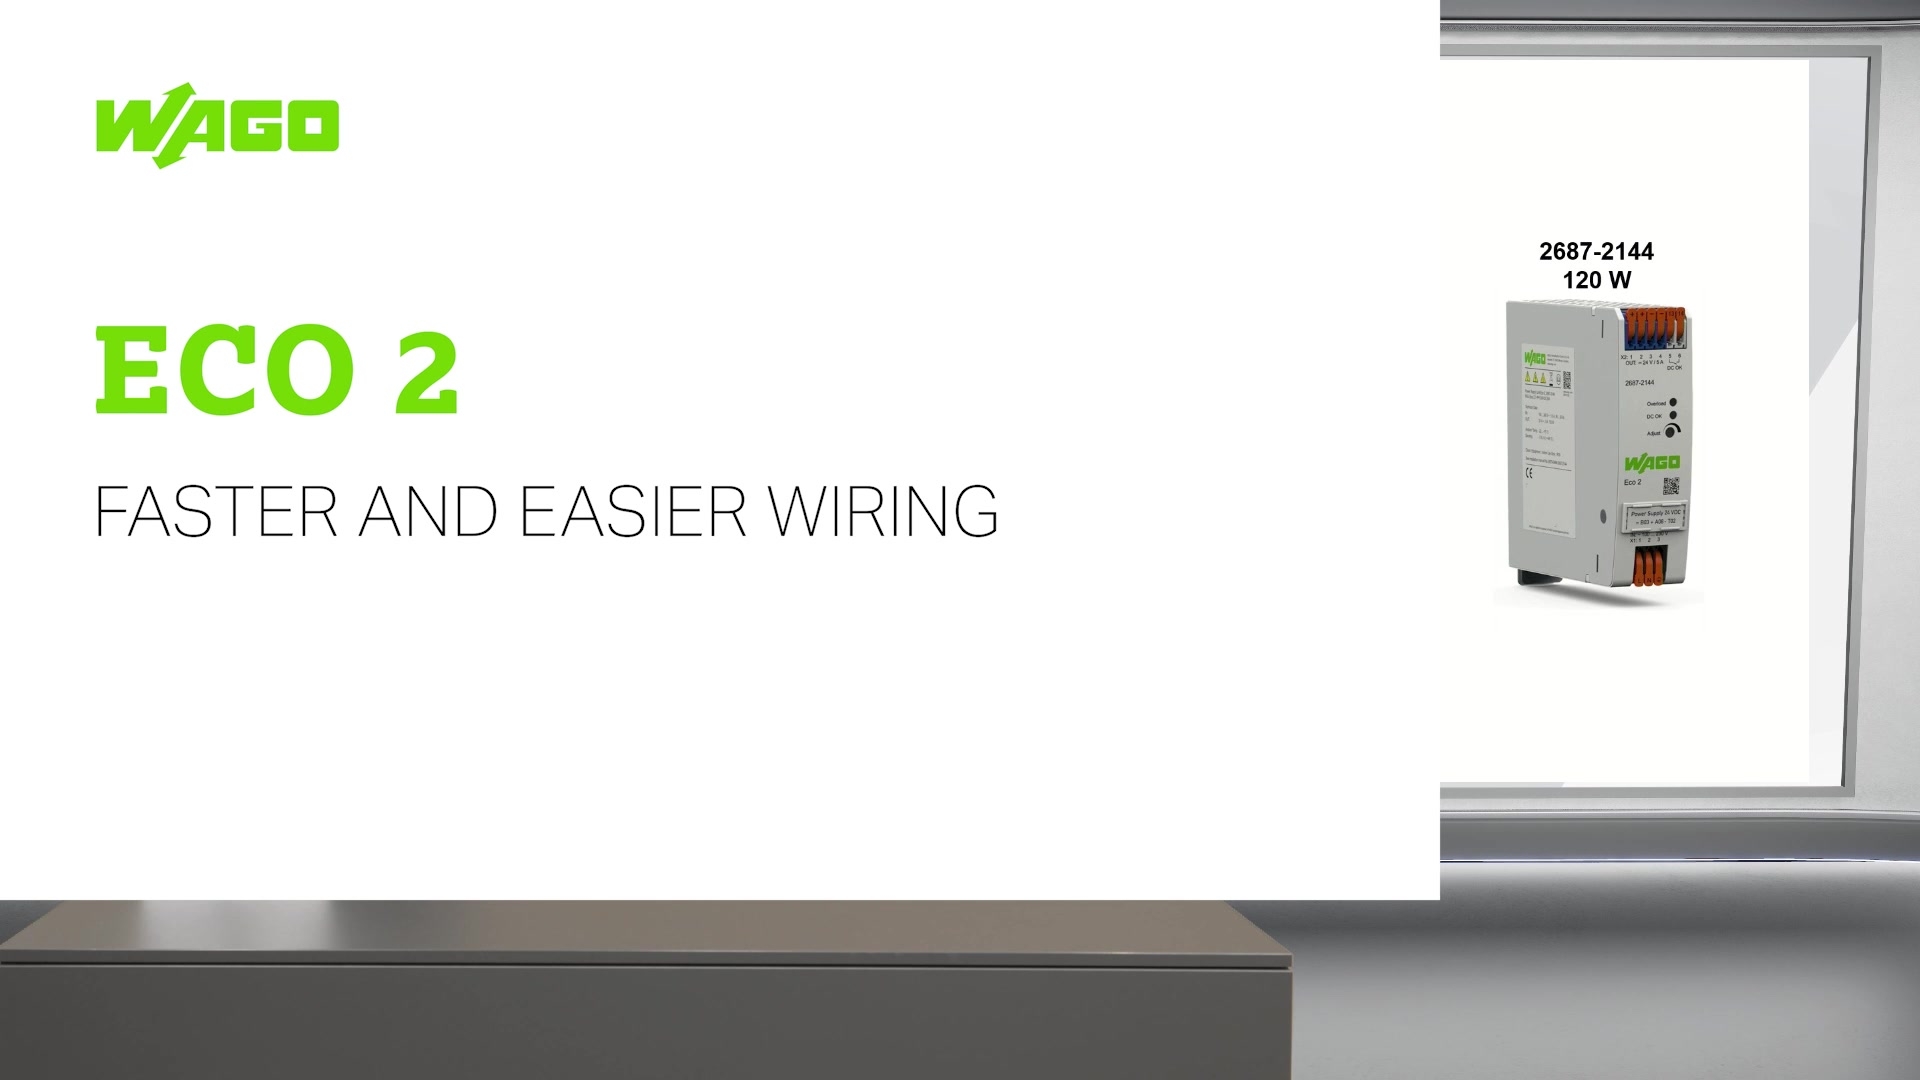 Eco 2 - Faster and easier wiring